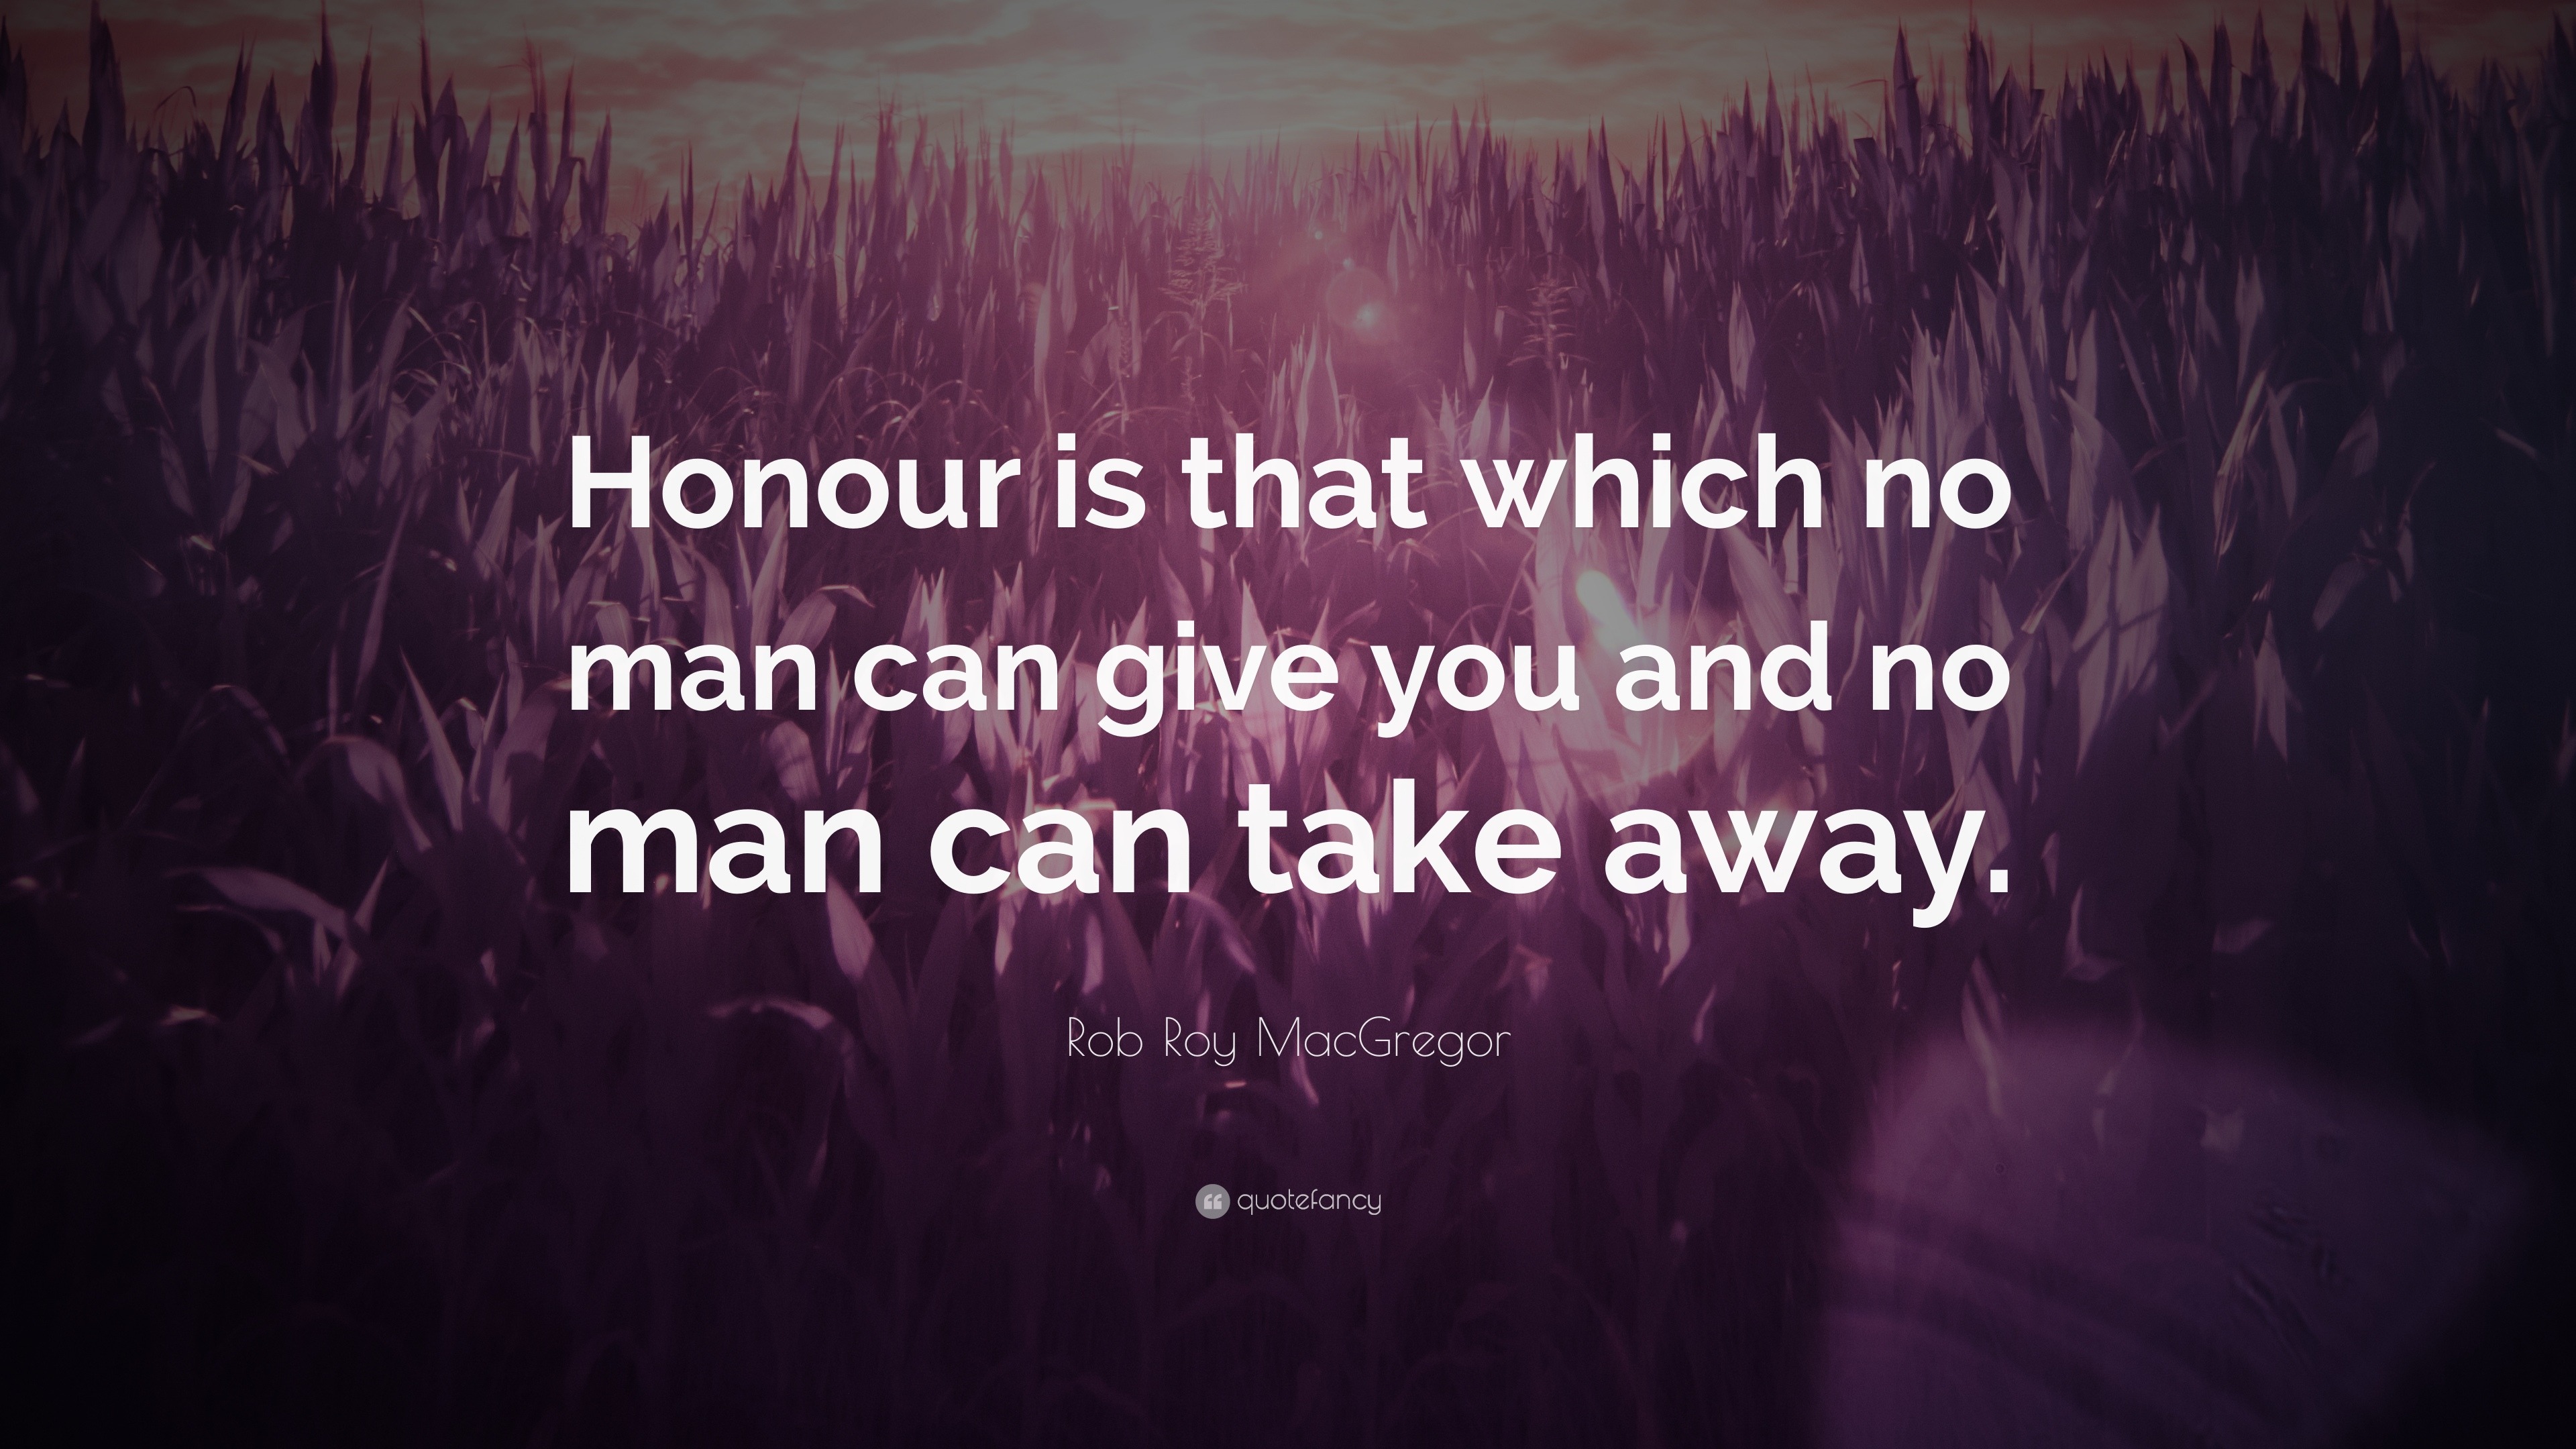 Rob Roy MacGregor Quote: “Honour is that which no man can give you and no  man